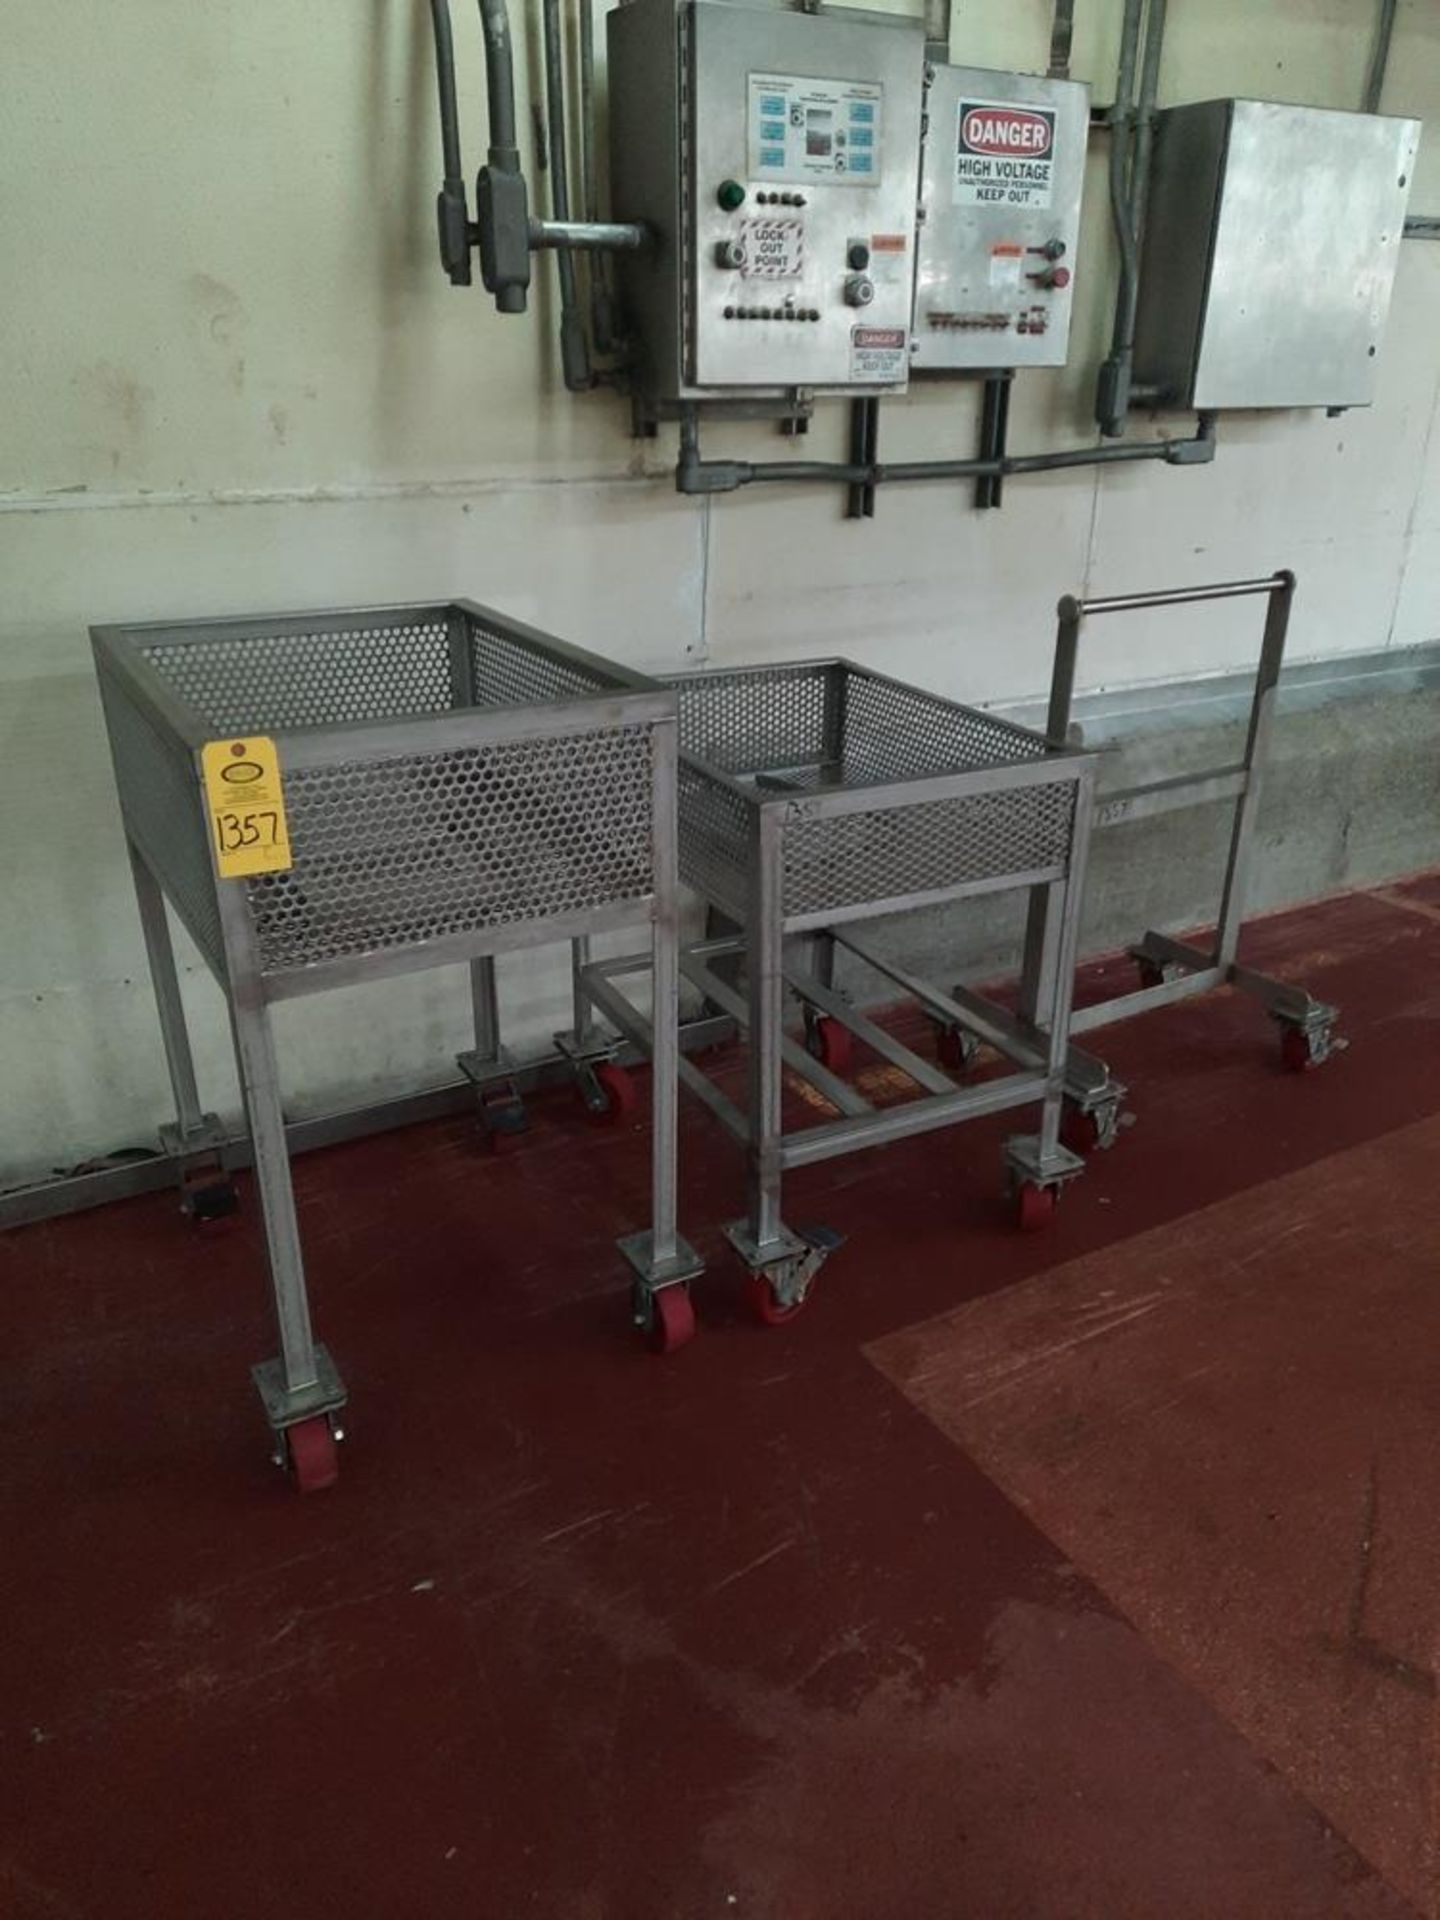 Lot Stainless Steel Carts, 24" W X 31" L, (1) Bag Holder, 2' wide: Required Loading Fee $75.00,